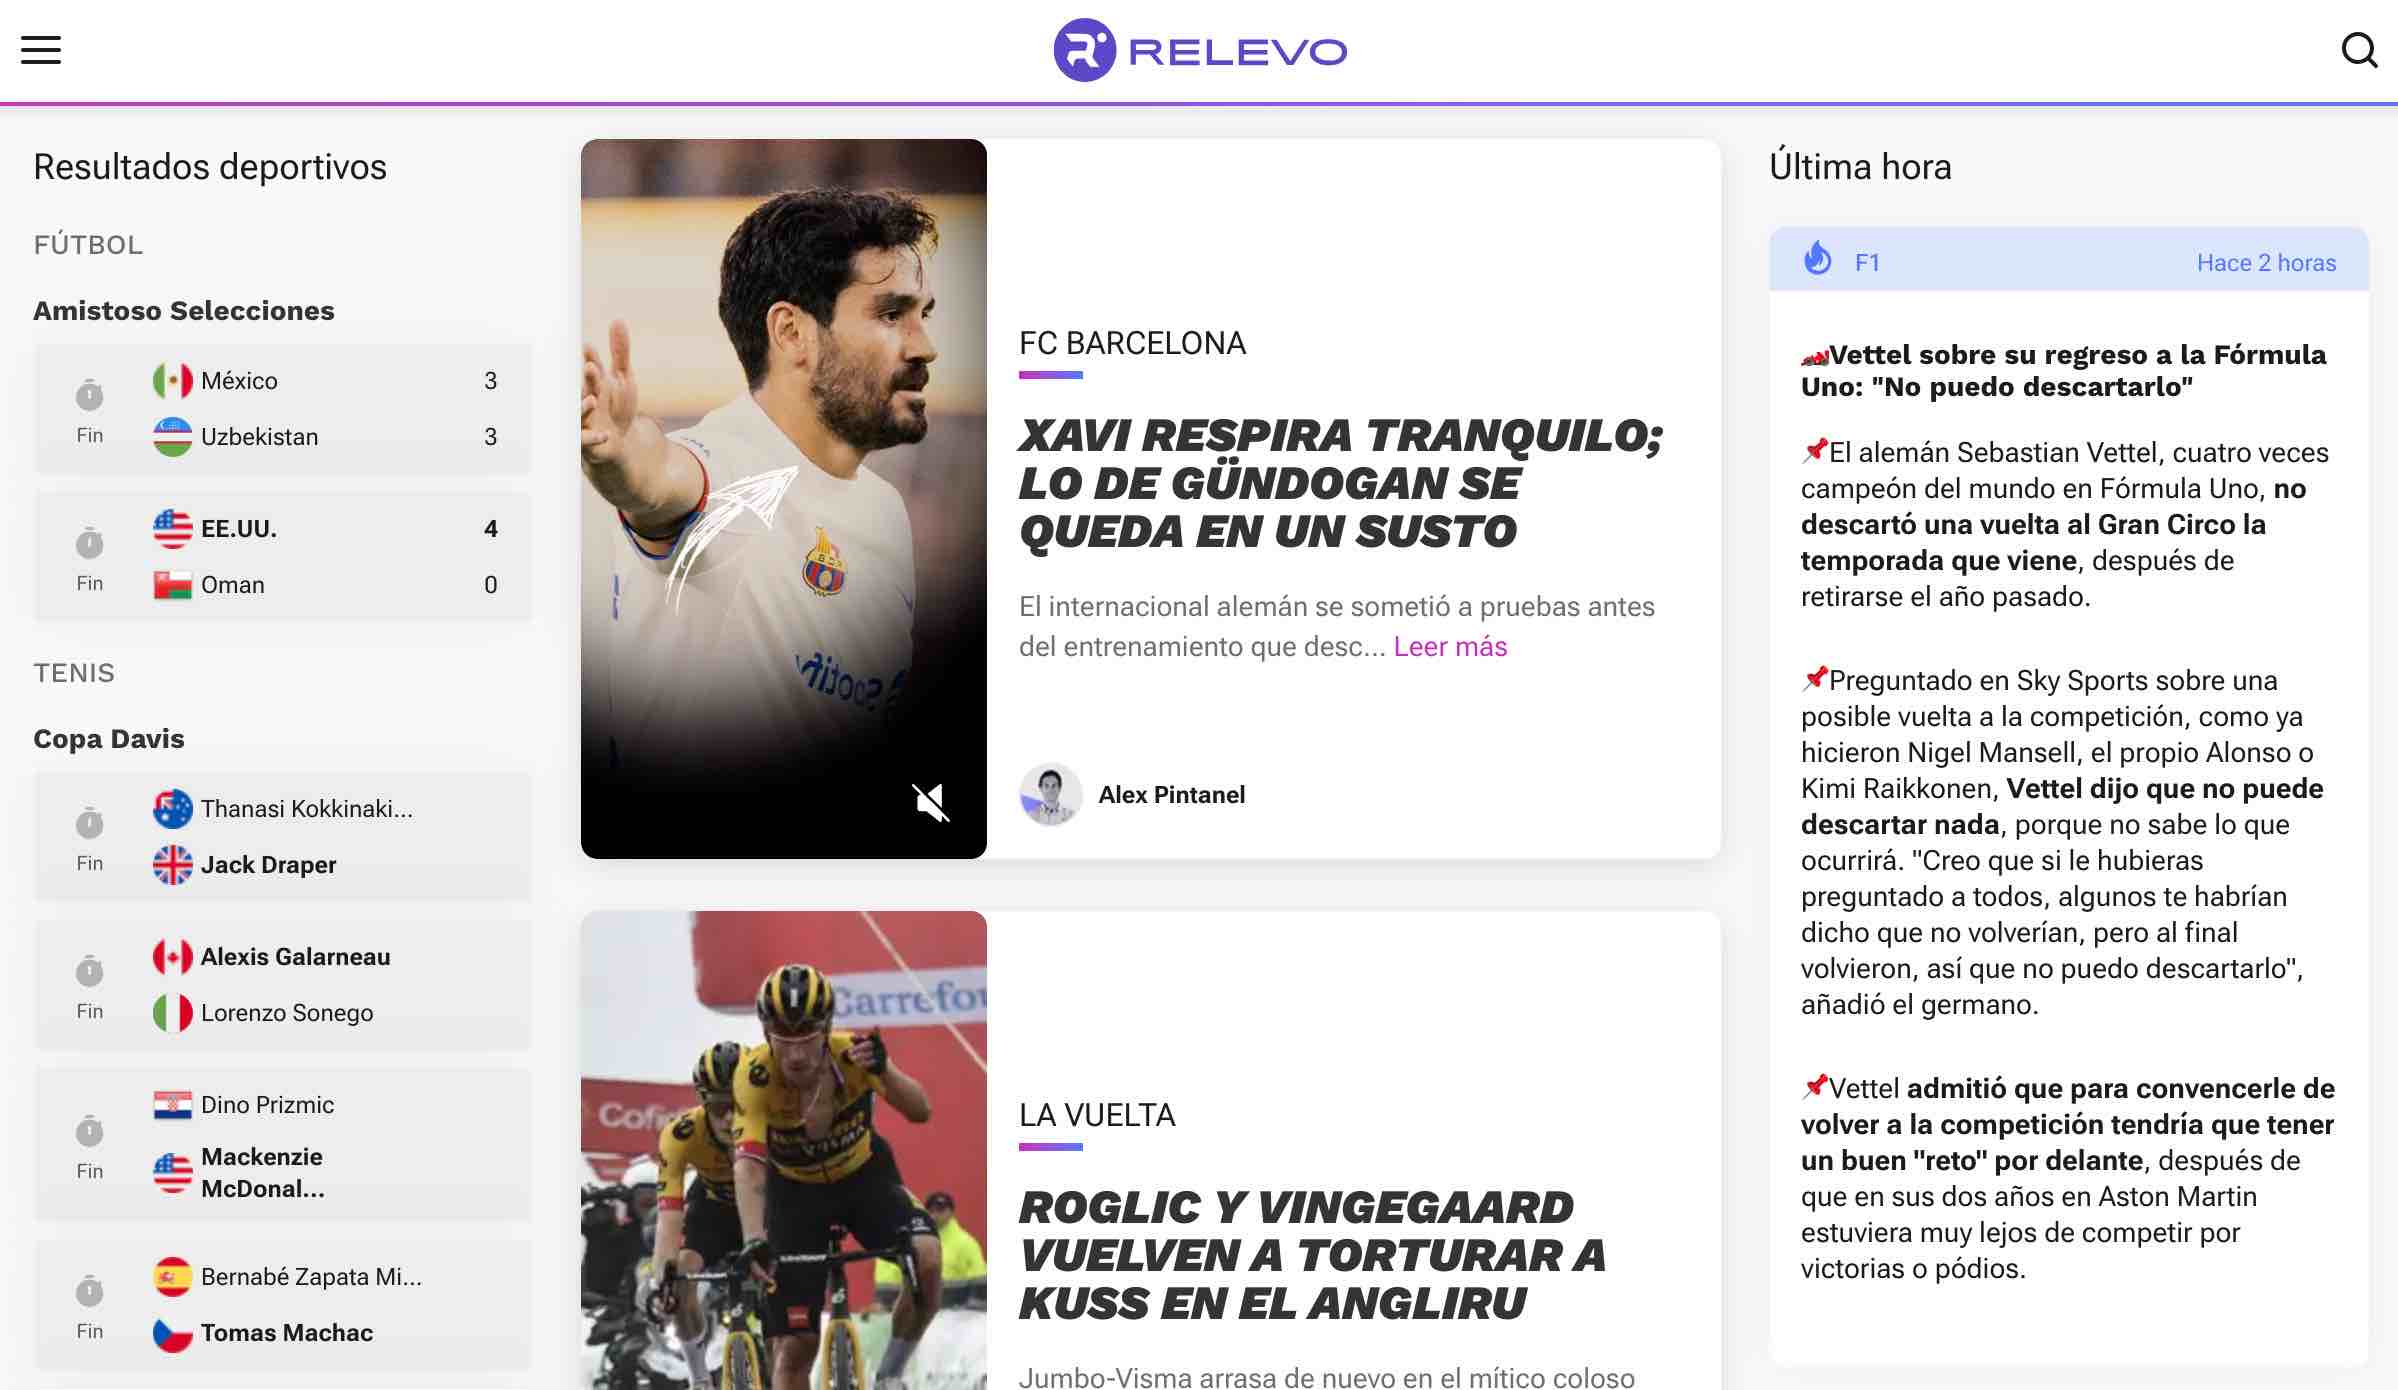 A screenshot of Relevo's home page. 